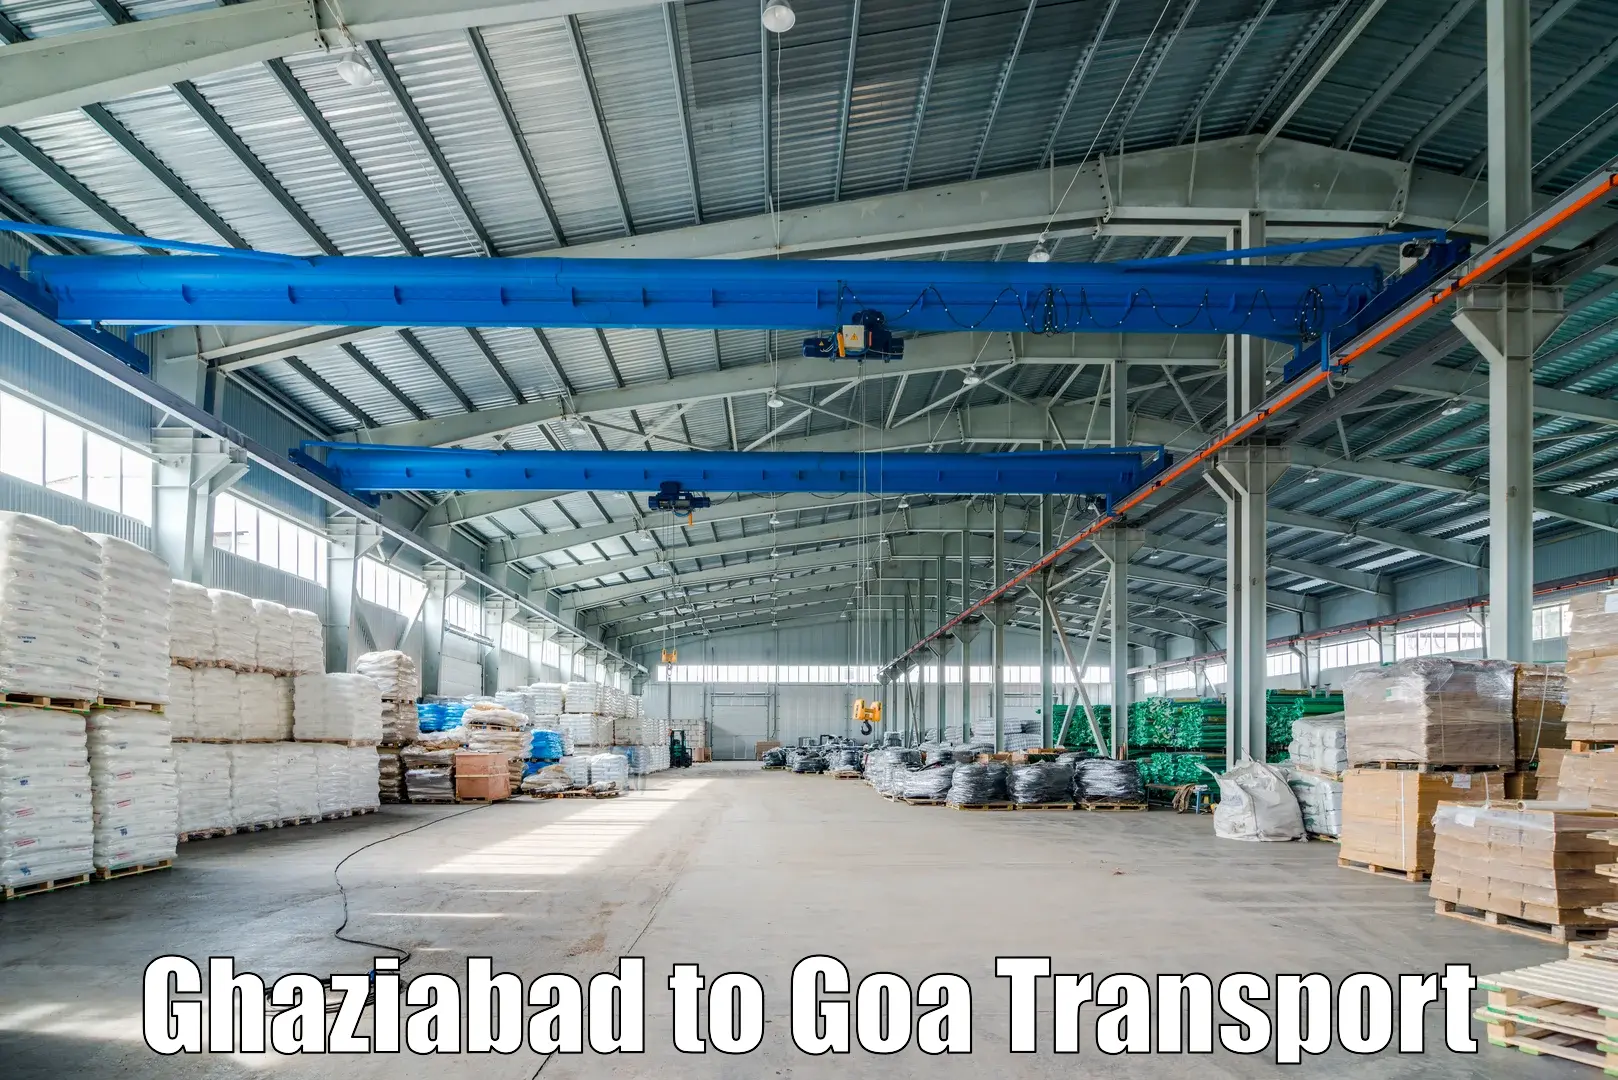 Daily parcel service transport Ghaziabad to Canacona